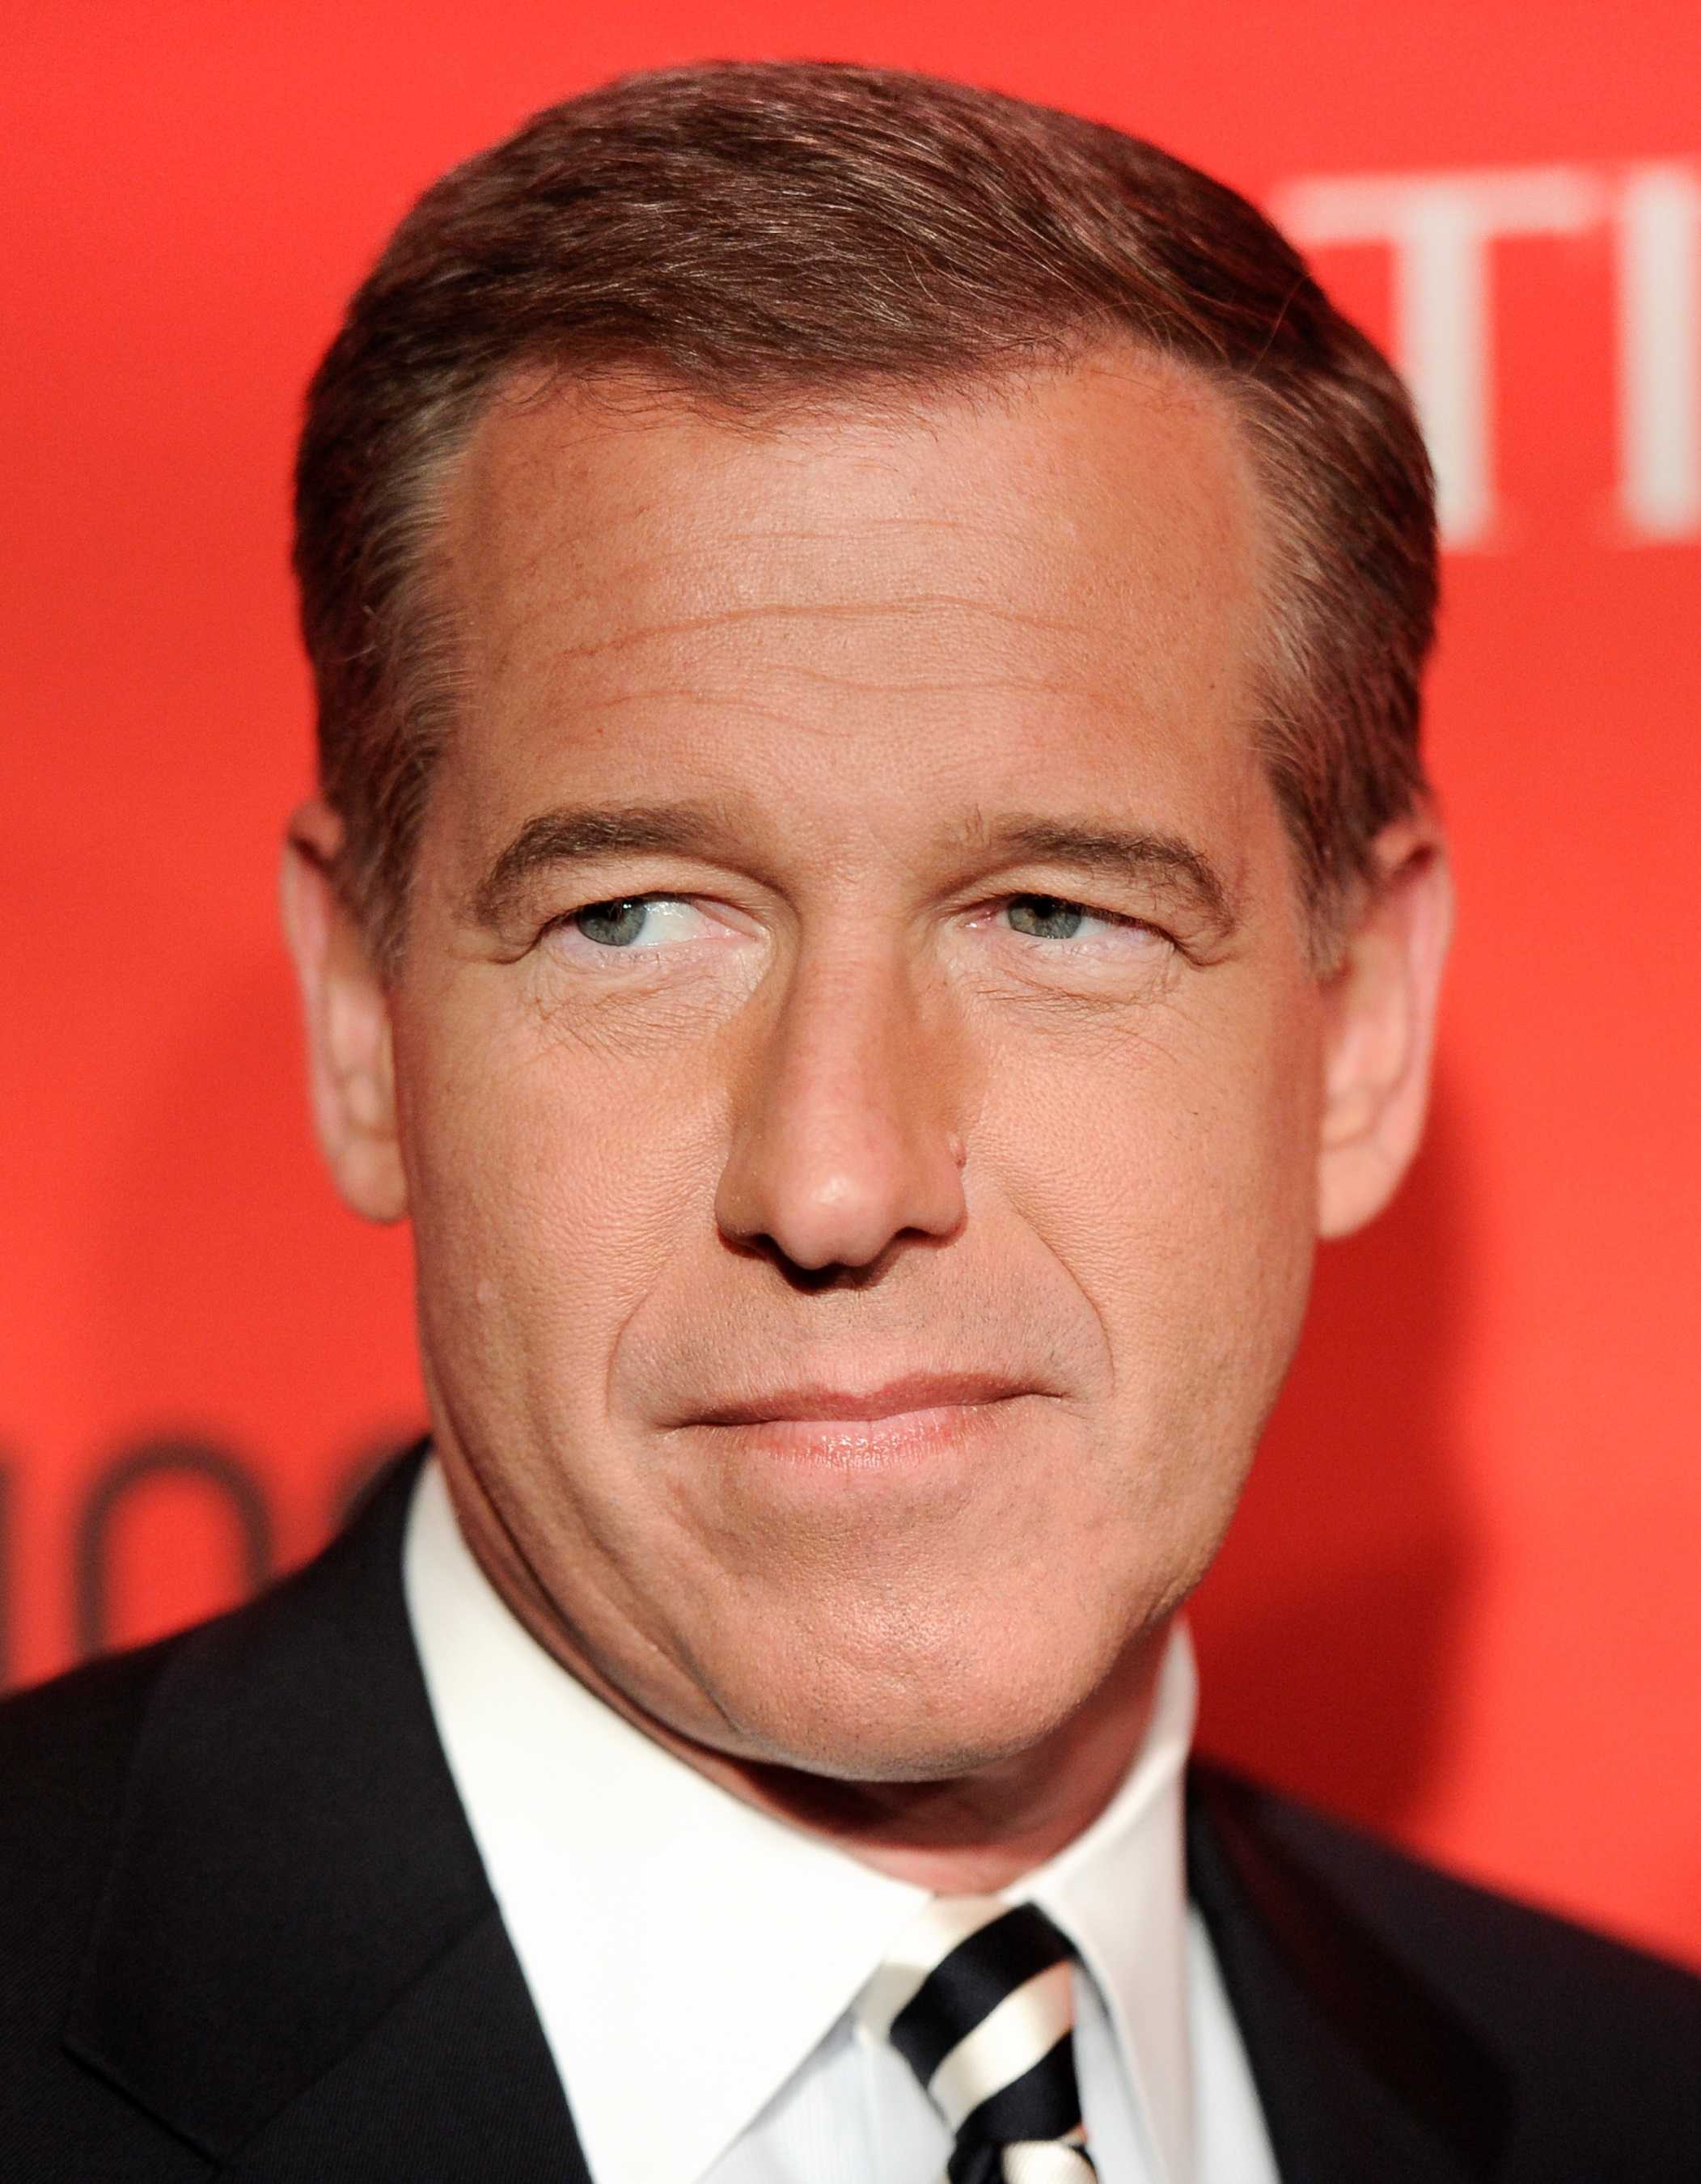 NBC News anchor Brian Williams attends the TIME 100 gala, celebrating the 100 most influential people in the world, at the Frederick P. Rose Hall on Tuesday, April 24, 2012 in New York. (AP Photo/Evan Agostini)